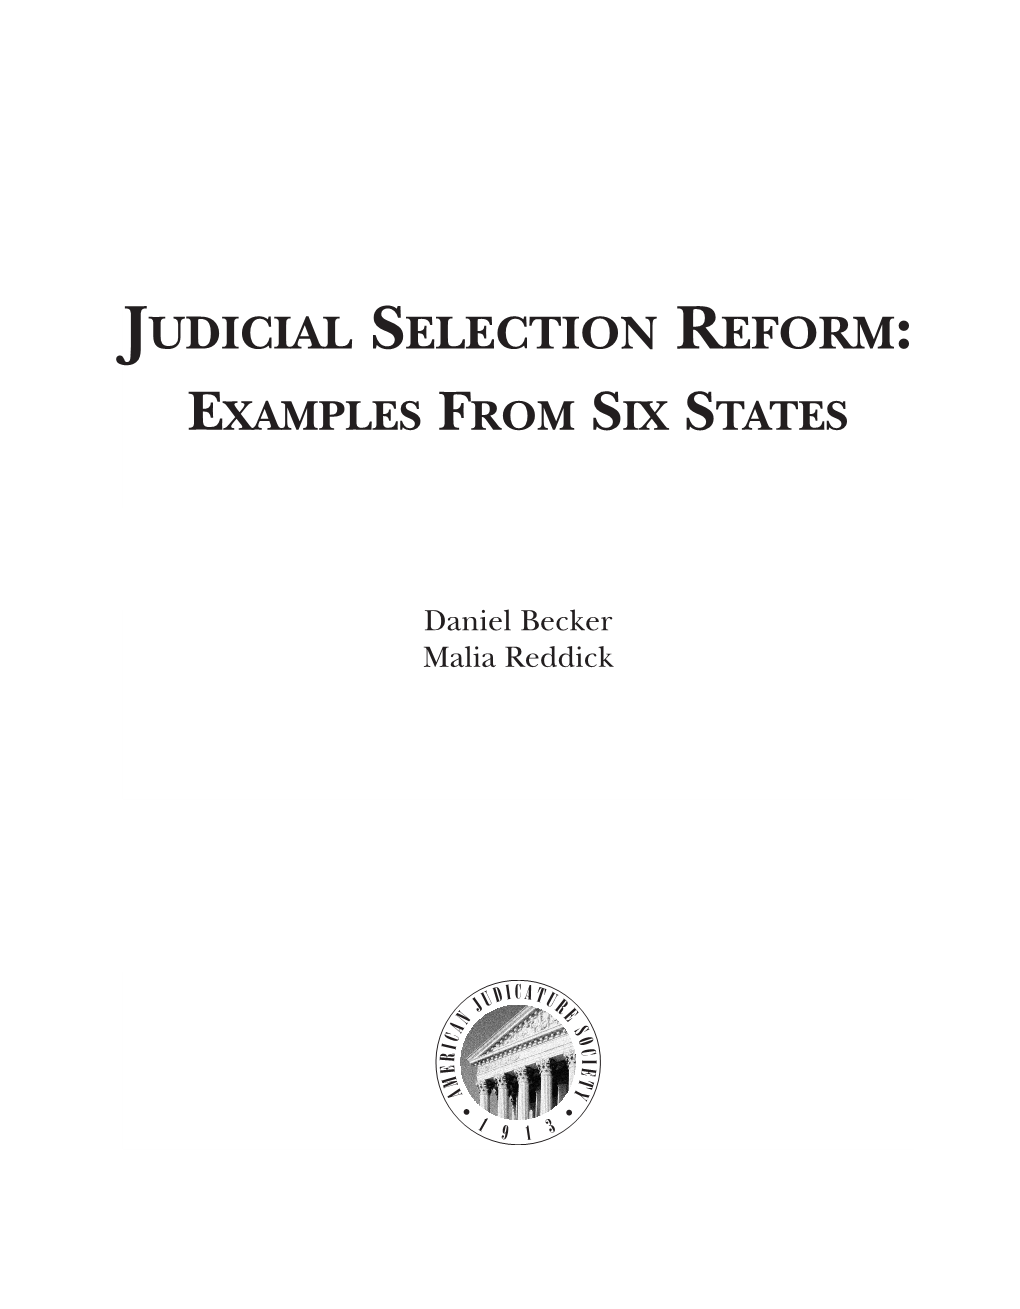 Judicial Selection Reform: Examples from Six States